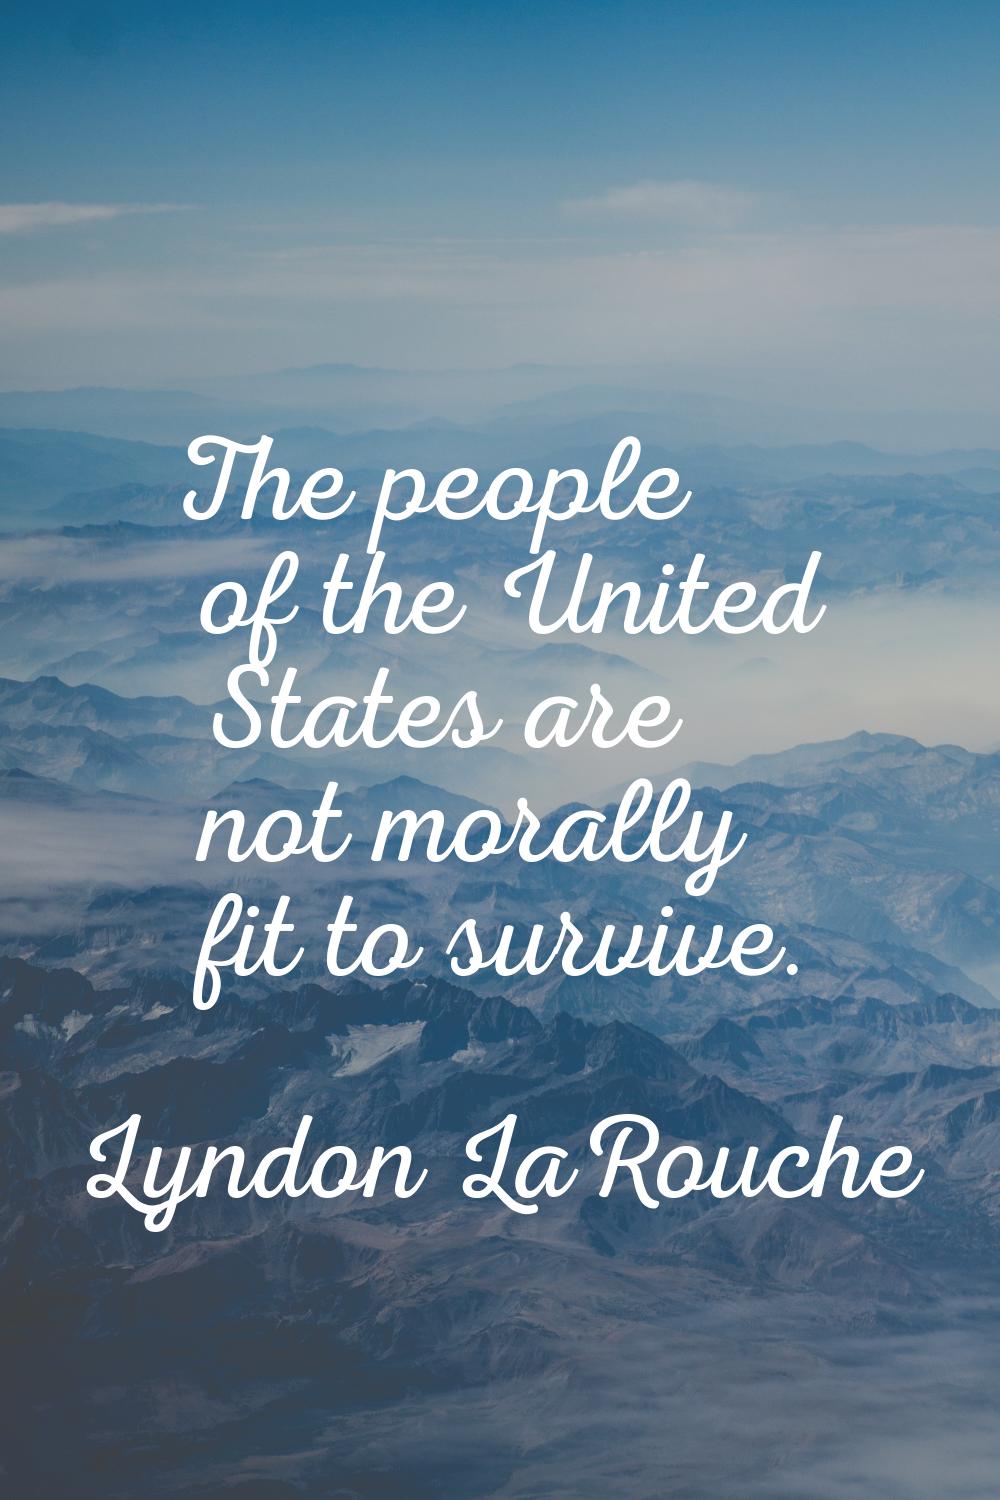 The people of the United States are not morally fit to survive.